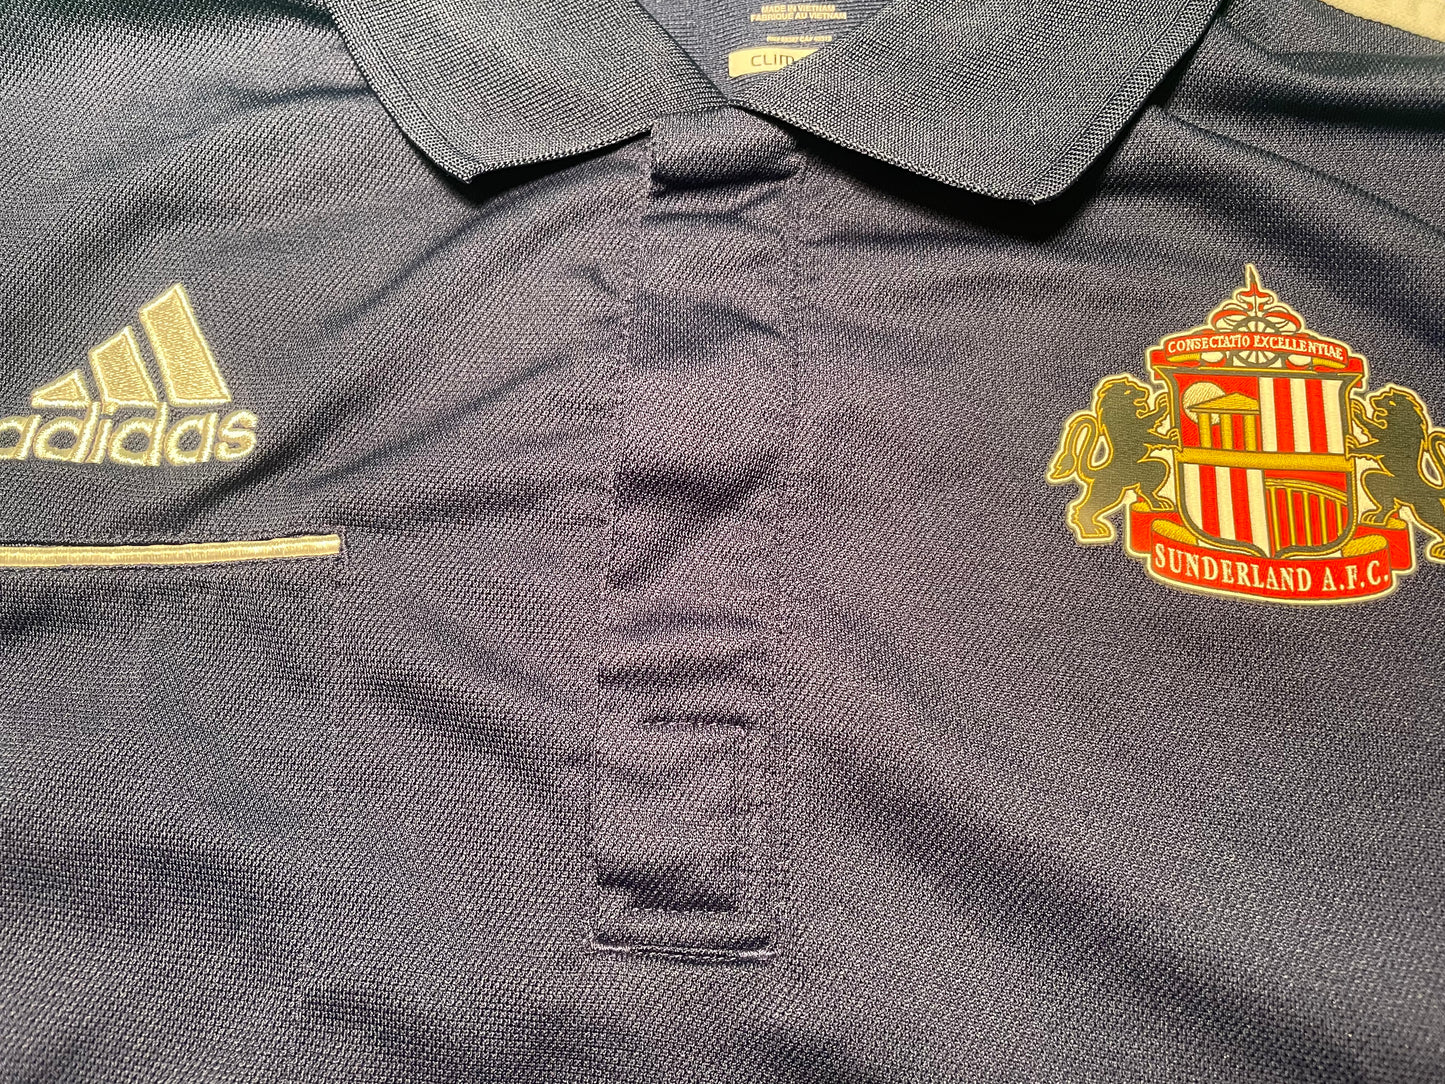 Sunderland polo shirt (excellent) Adults 3XL size 46/48. Height 26 inches